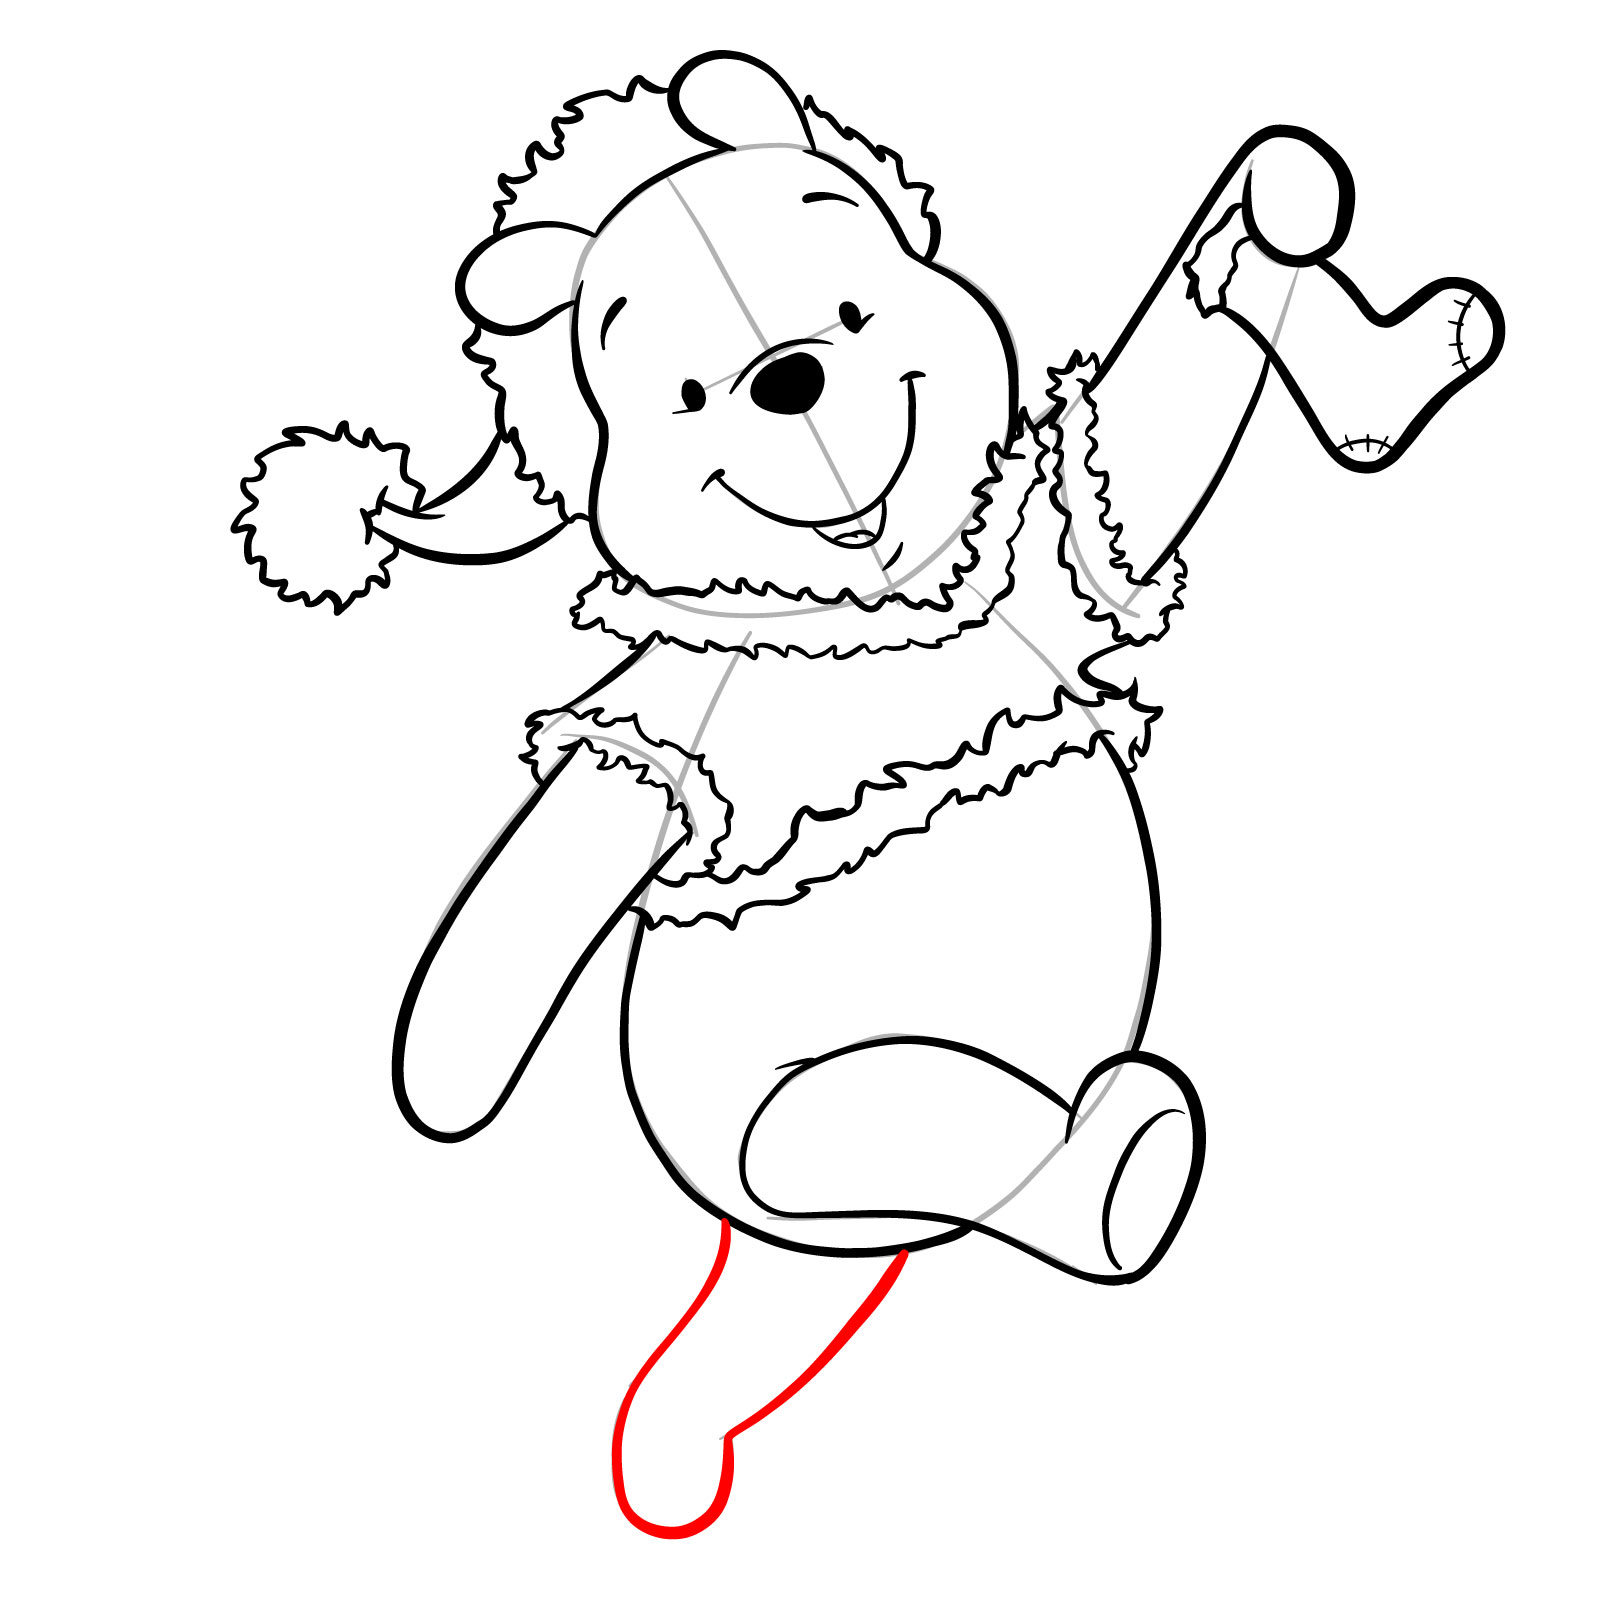 How to draw Winnie-the-Pooh Christmas style - step 26